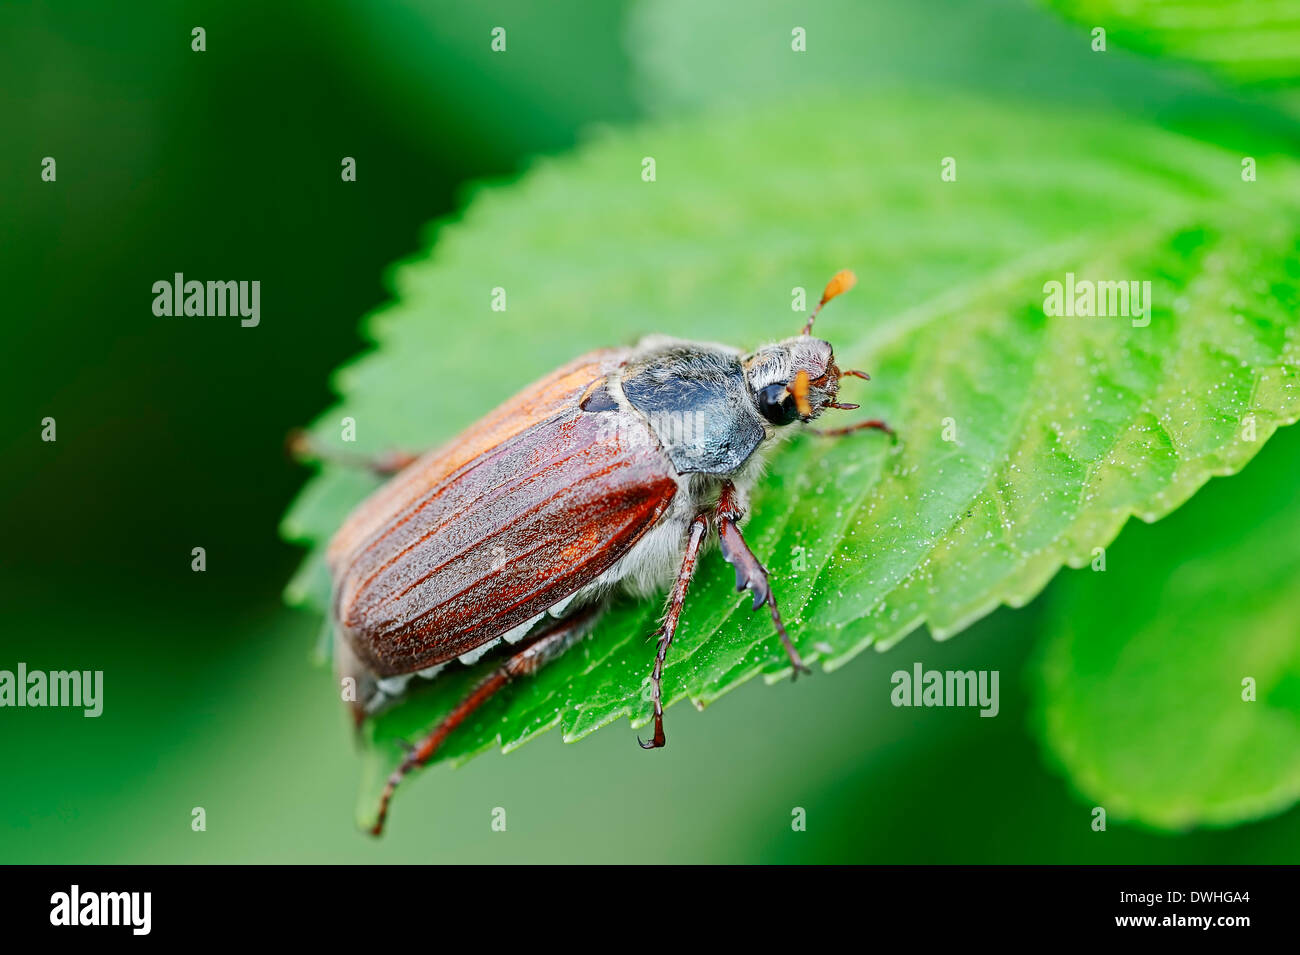 Common Cockchafer or May Bug (Melolontha melolontha), North Rhine-Westphalia, Germany Stock Photo